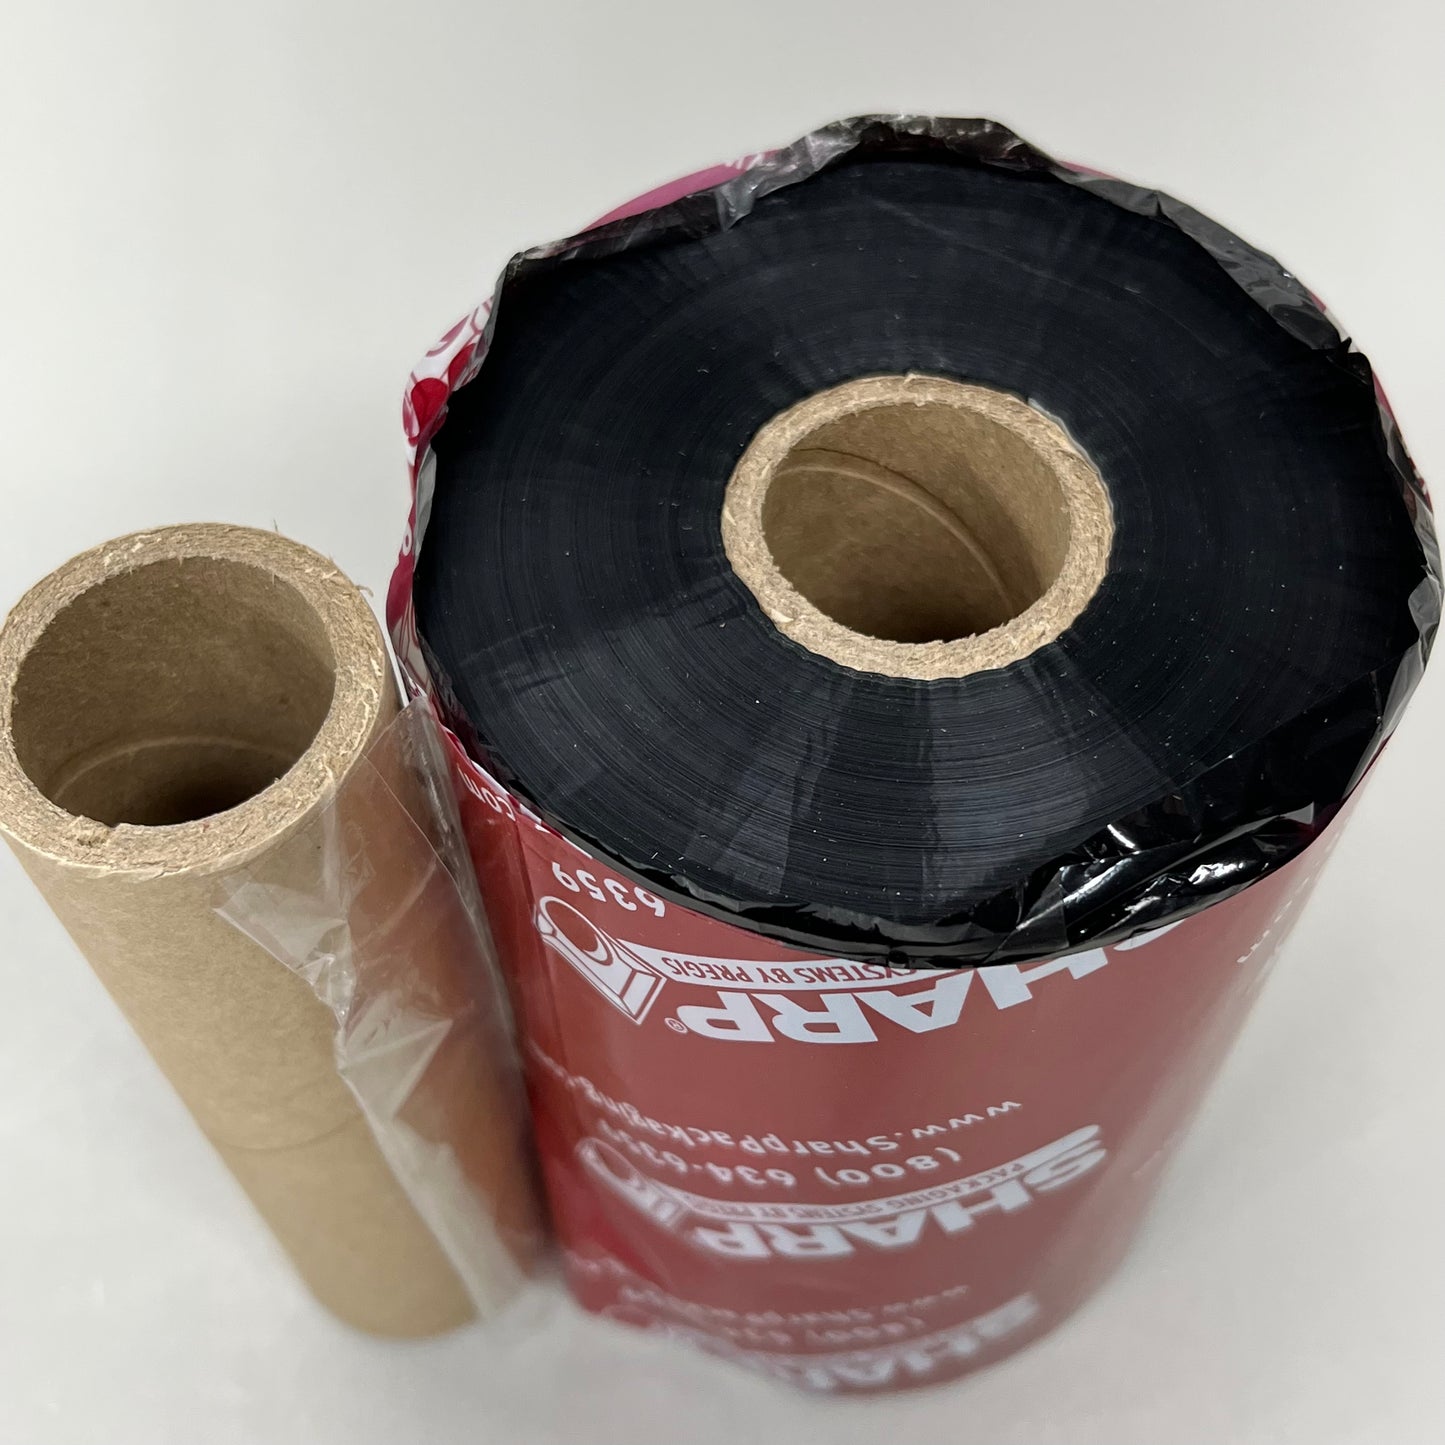 SHARP 2-PACK! Packaging Systems Thermal Transfer Ribbon 4.72" x 2001' Black 869216-02 New